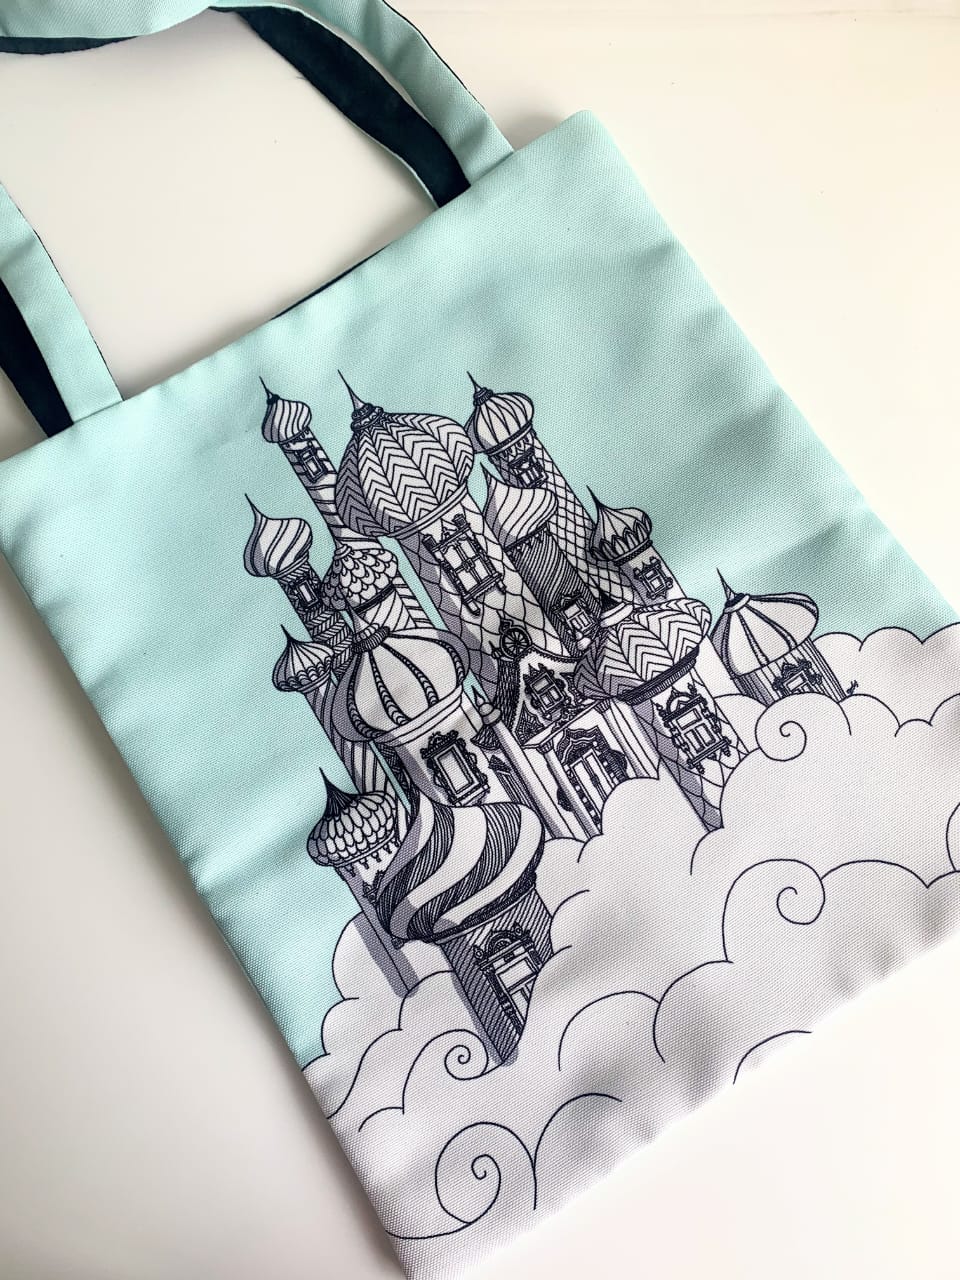 Vintage Prayer Mosque  Whimsy - Tote bag